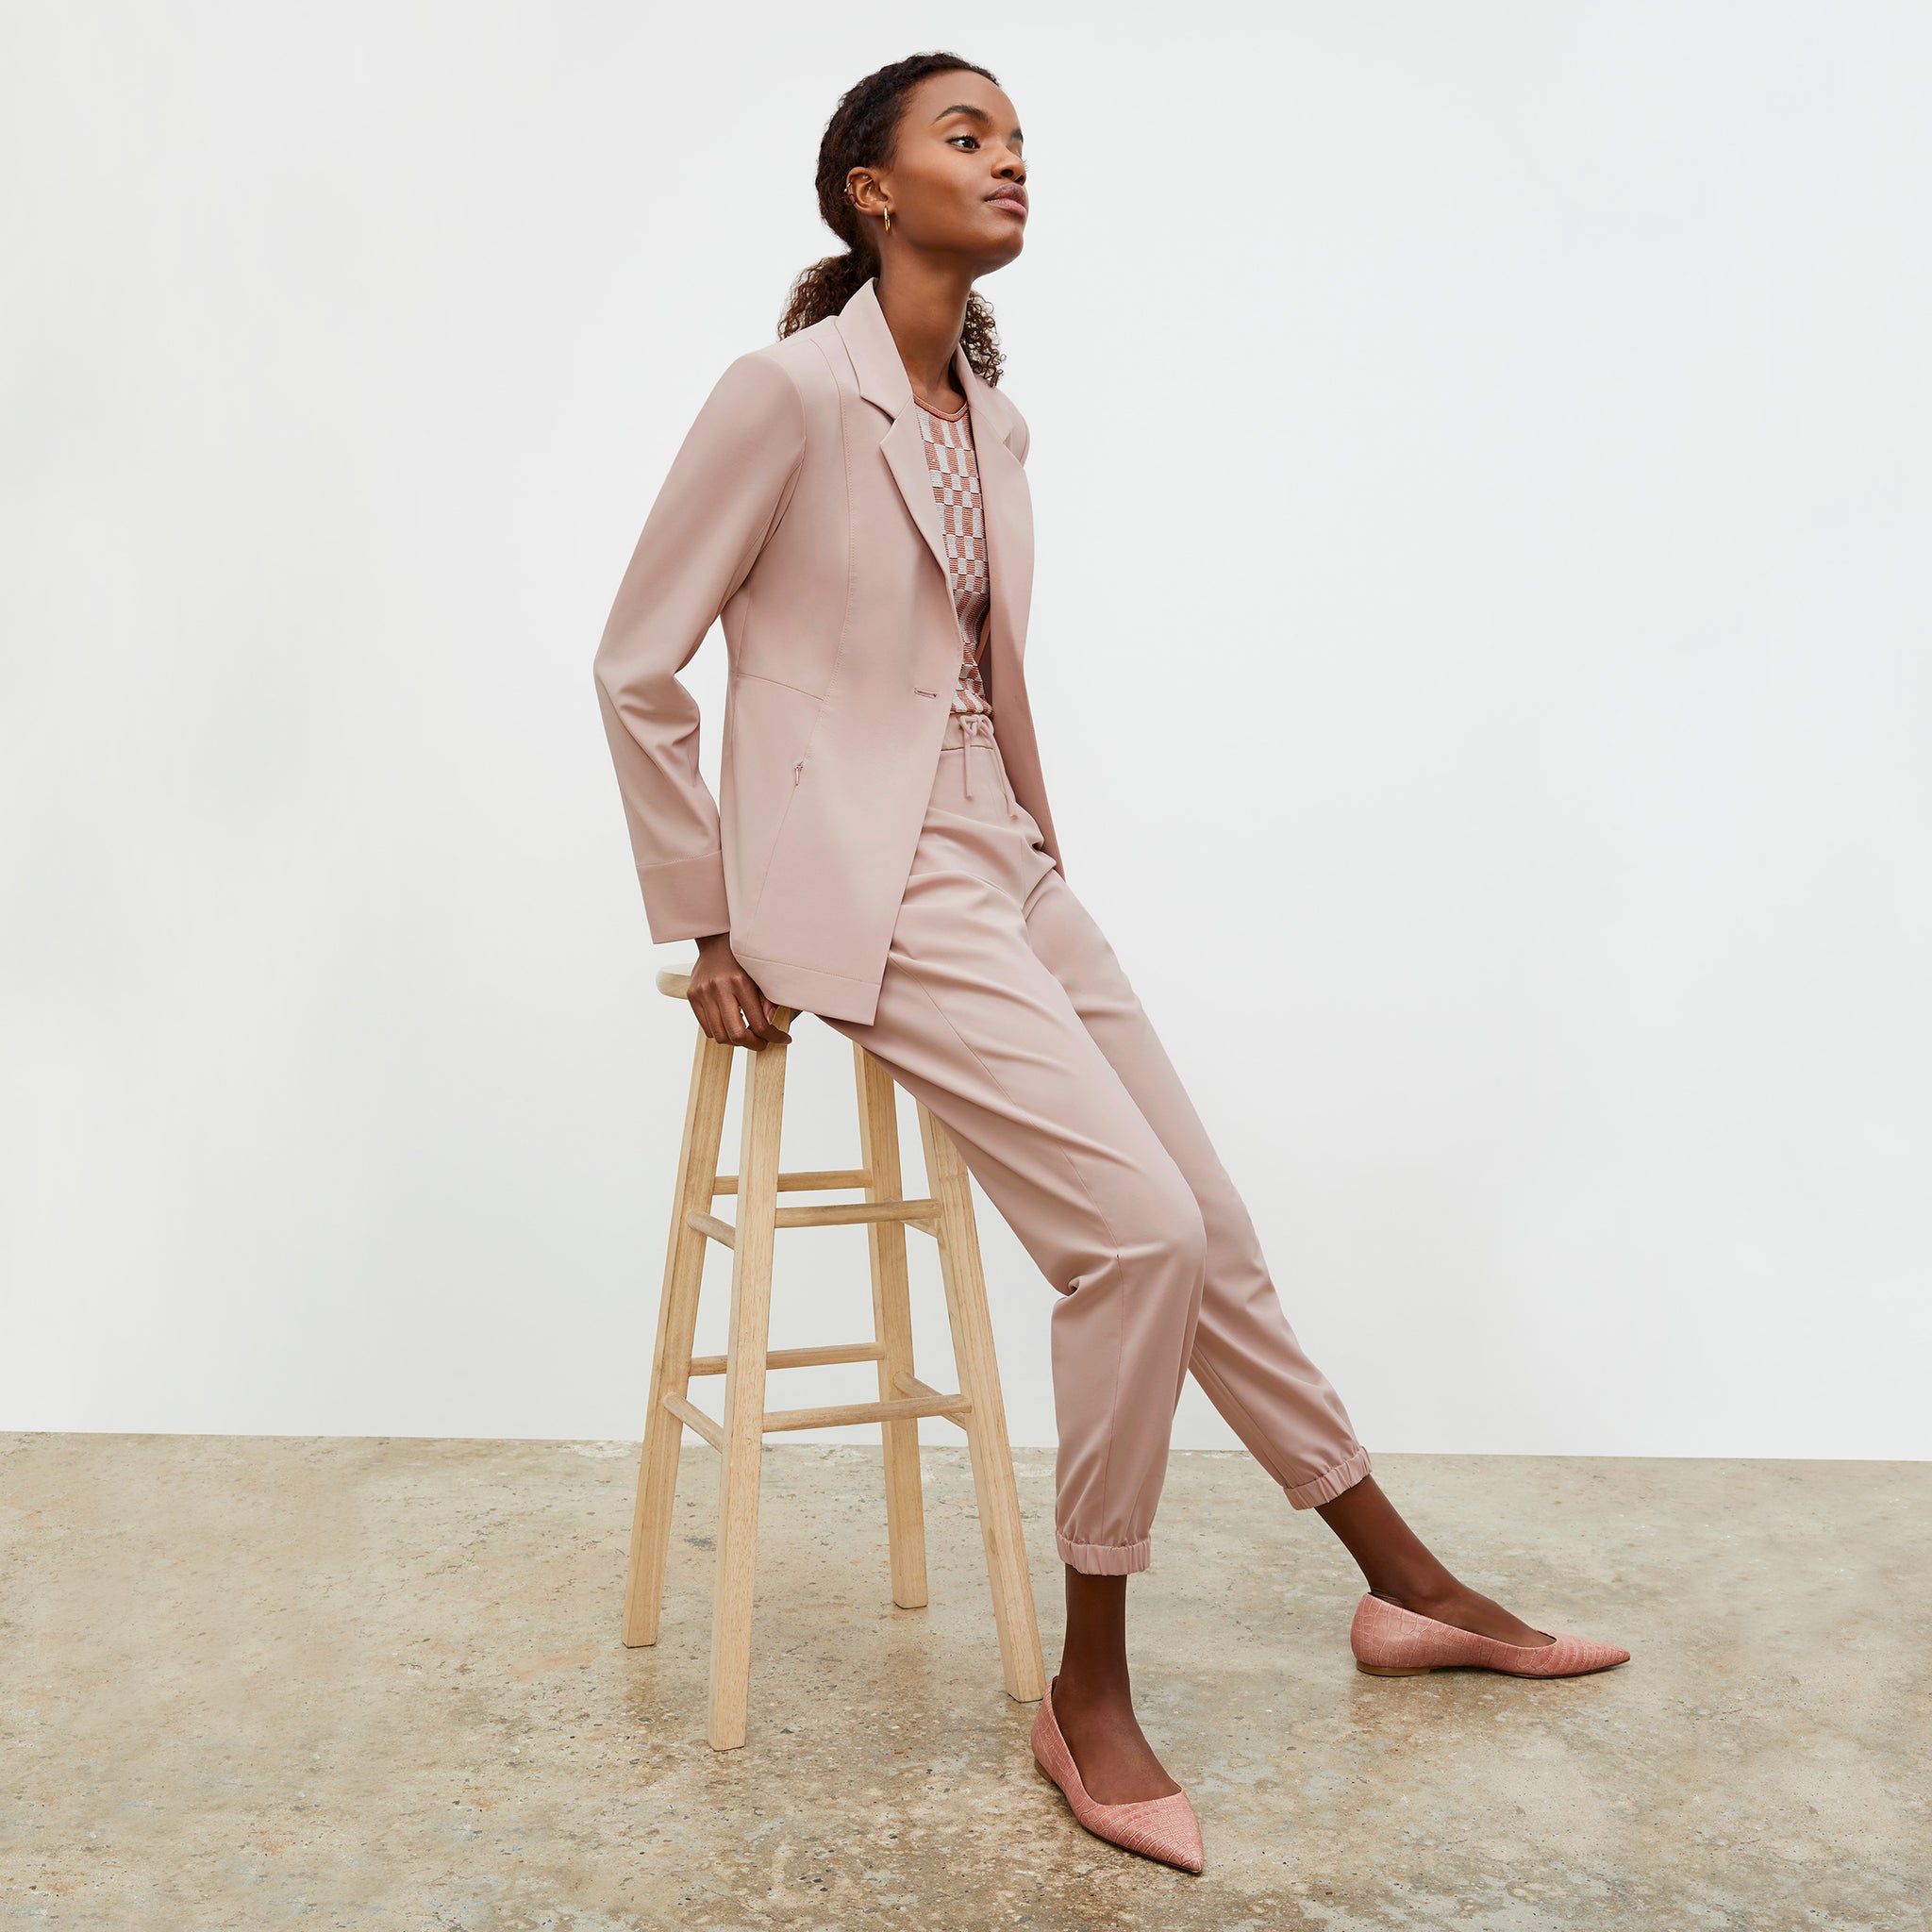 Front image of a woman wearing the Delaney jogger in Blush